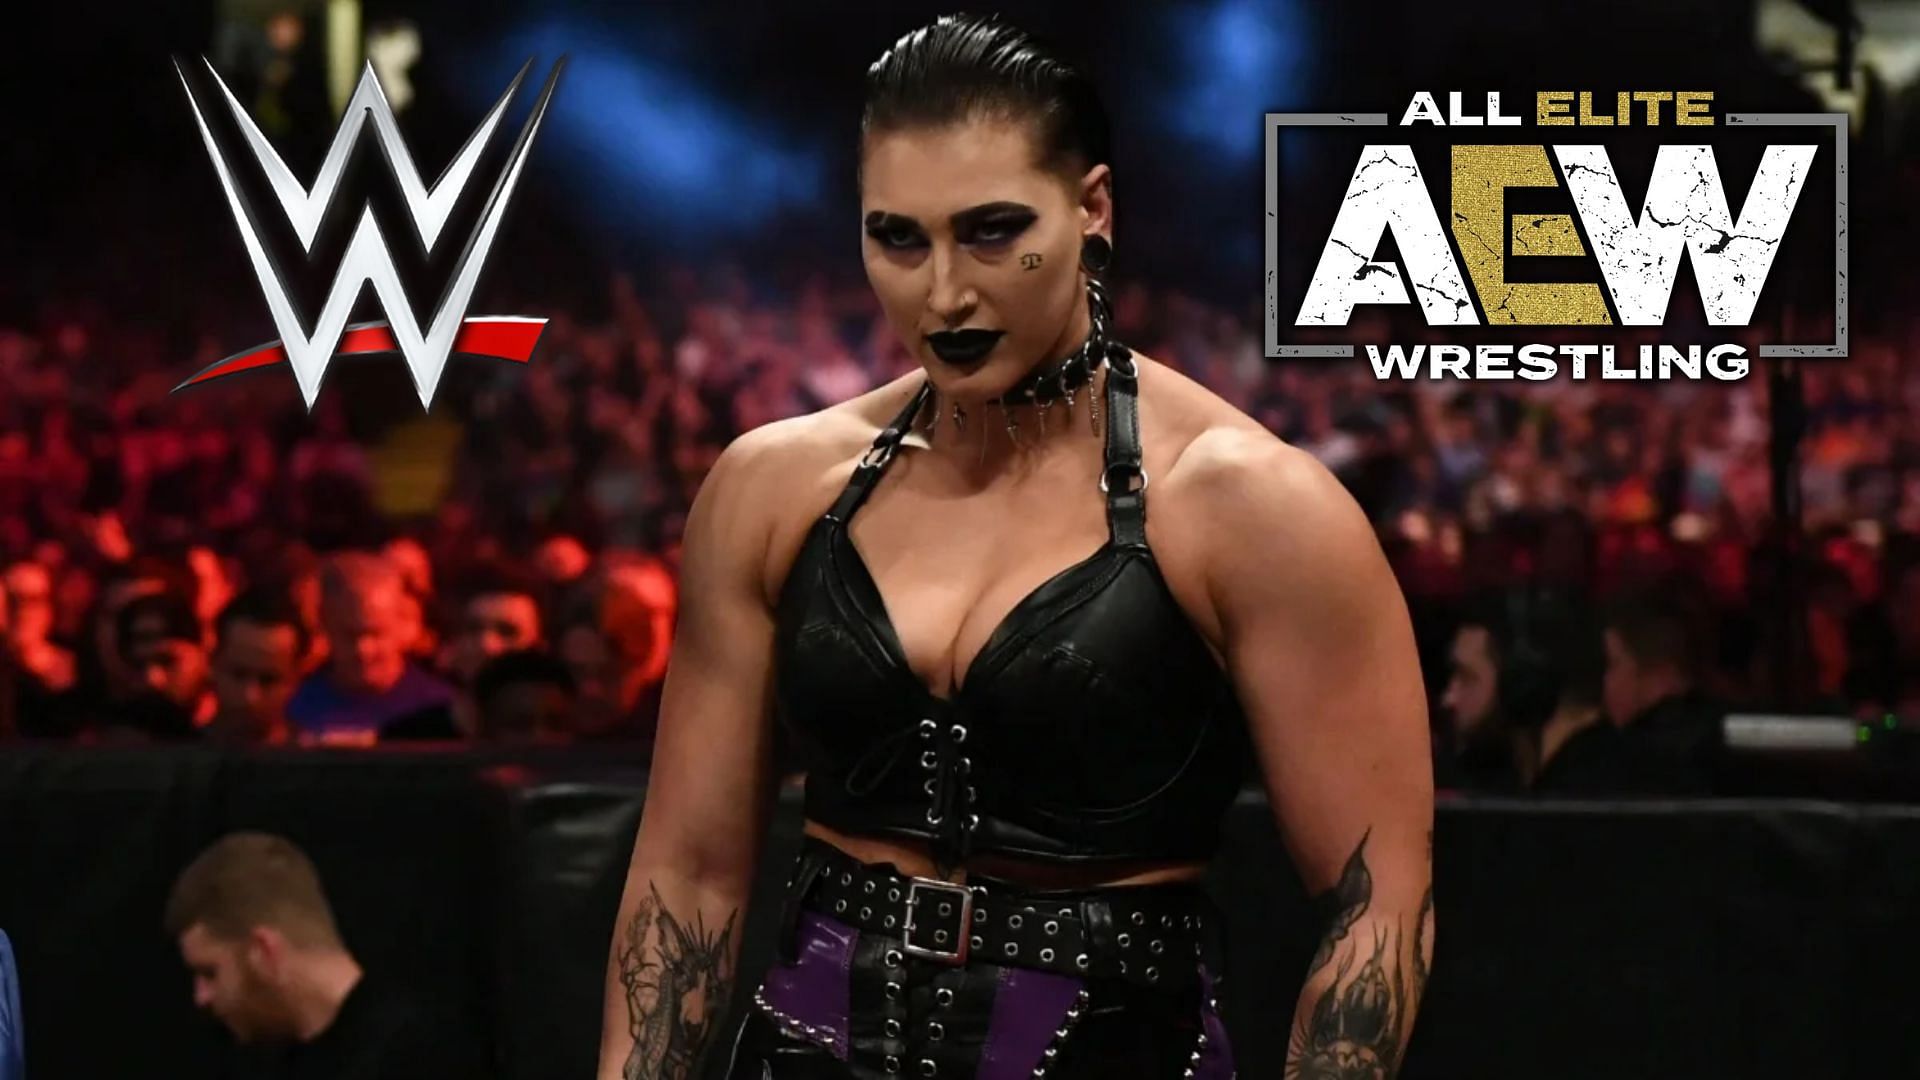 Rhea Ripley was recently used as an example to criticize the AEW division